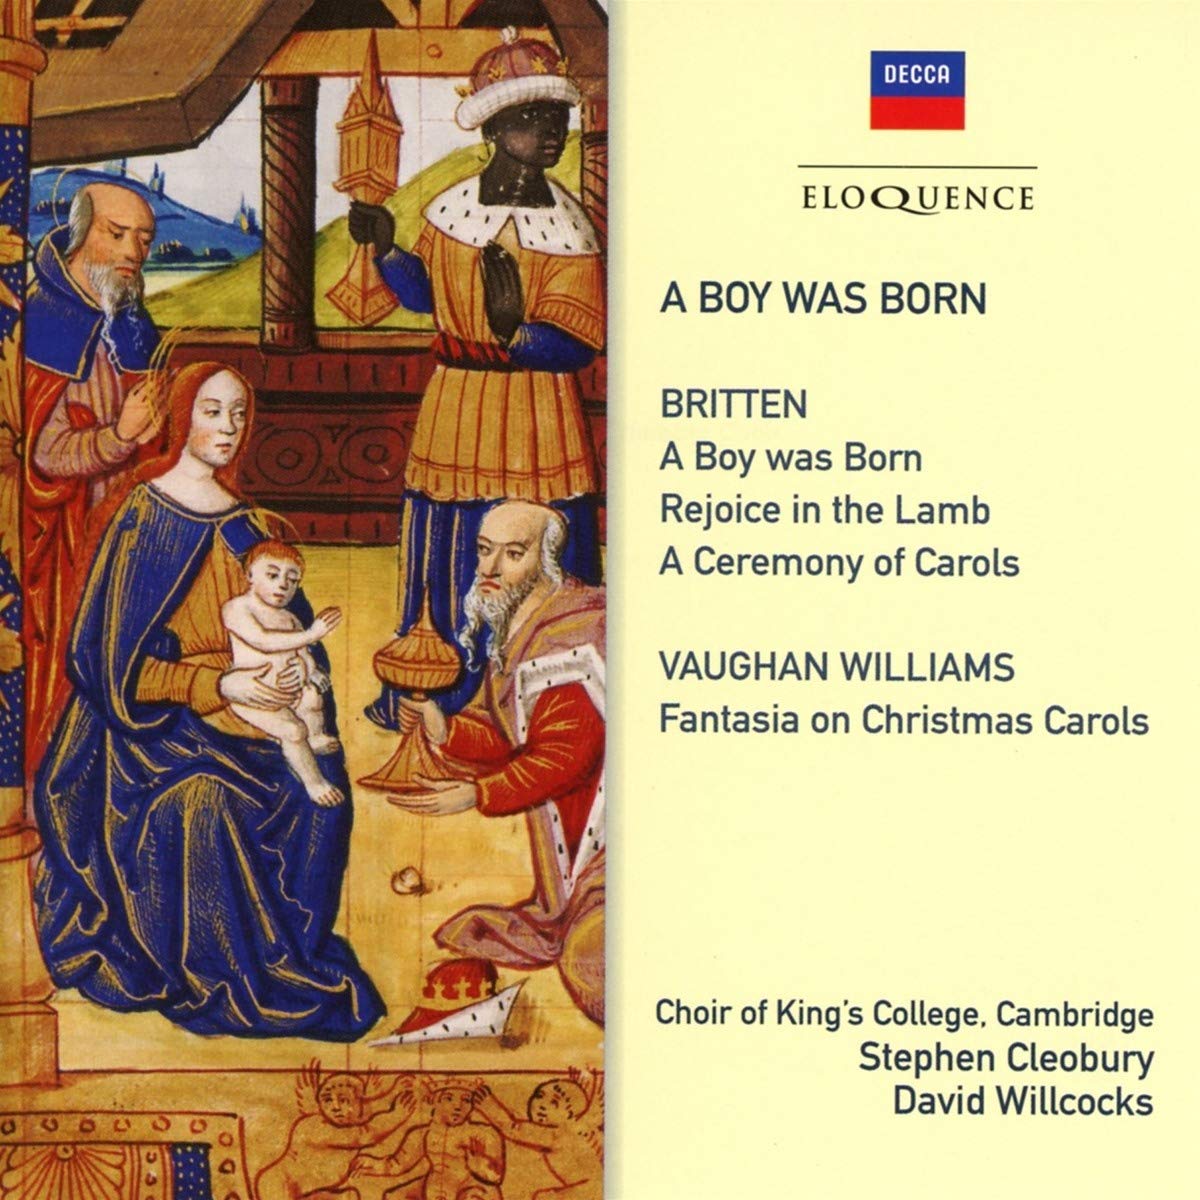 A BOY WAS BORN: MUSIC BY BRITTEN & VAUGHAN WILLIAMS FOR CHRISTMAS SEASON - CHOIR OF KING'S COLLEGE, CAMBRIDGE